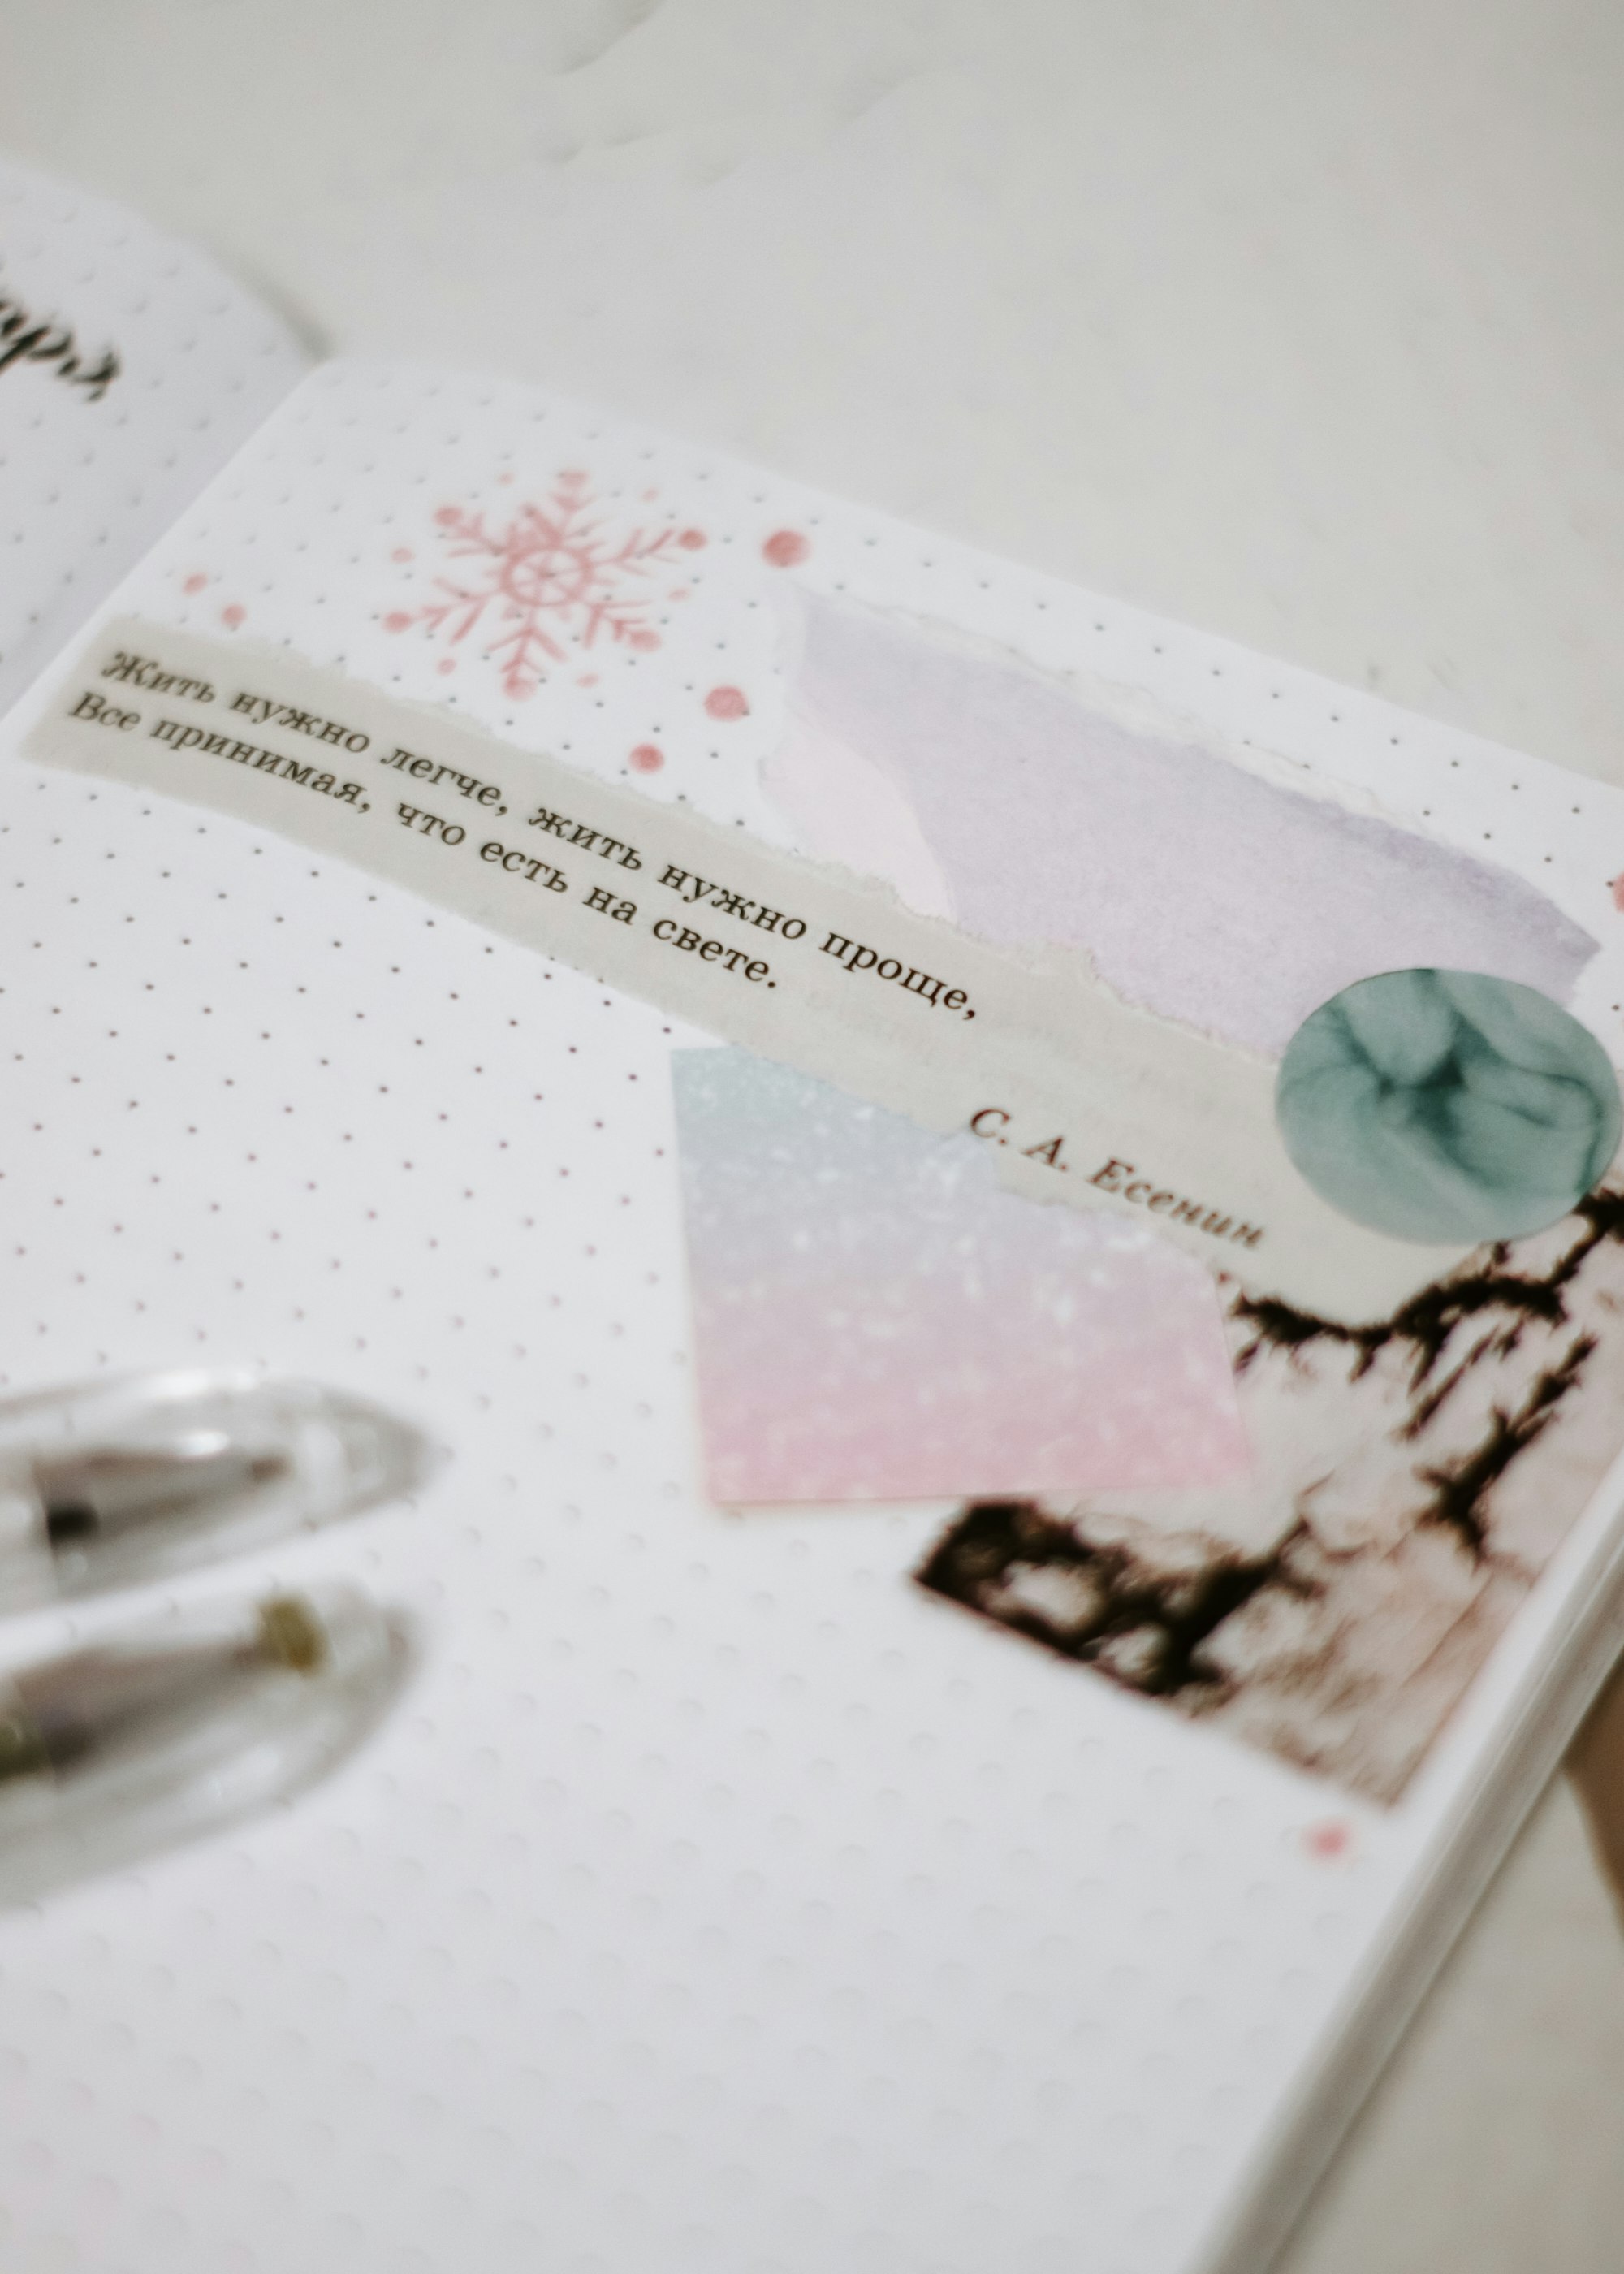 Eleven Ways to Pre-decorate Your Journal